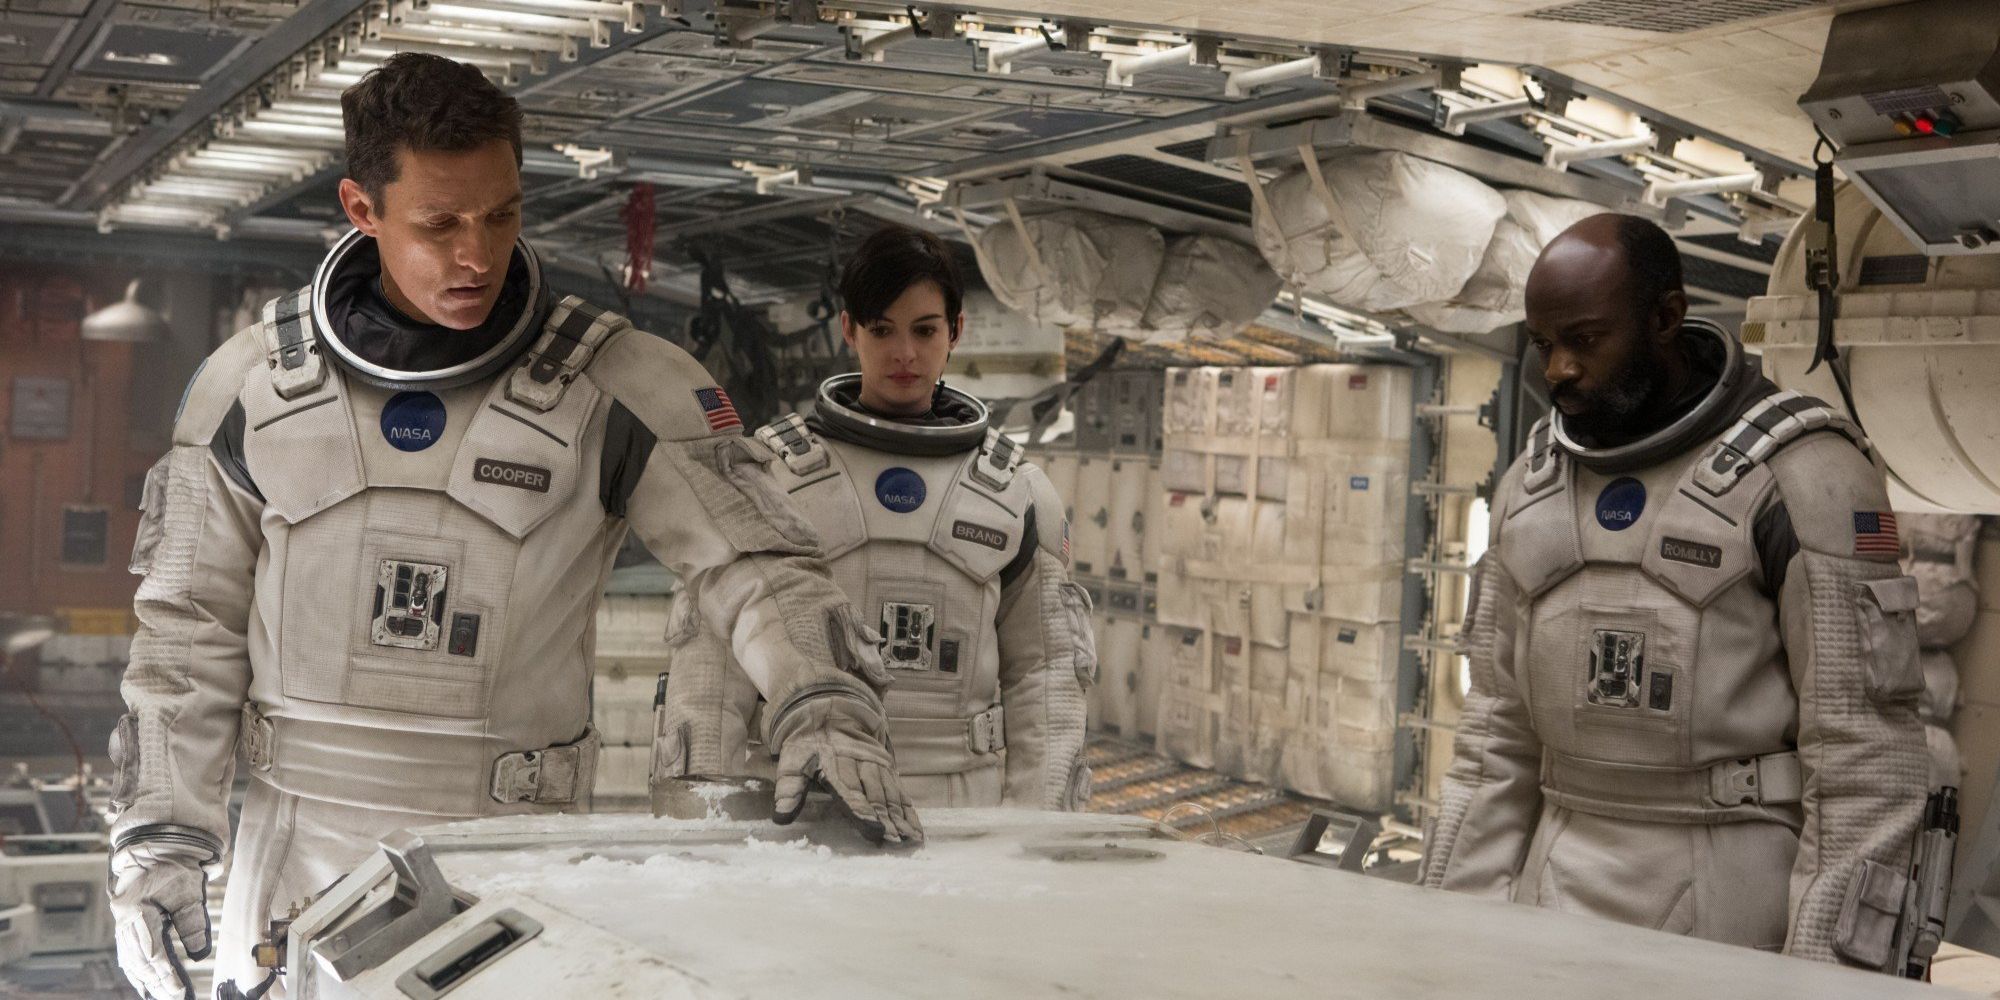 Coop (Matthew McConaughey), Professor Romilly (David Gyasi), and Dr. Brand (Anne Hathaway) looking at a cryostasis pod in Interstellar